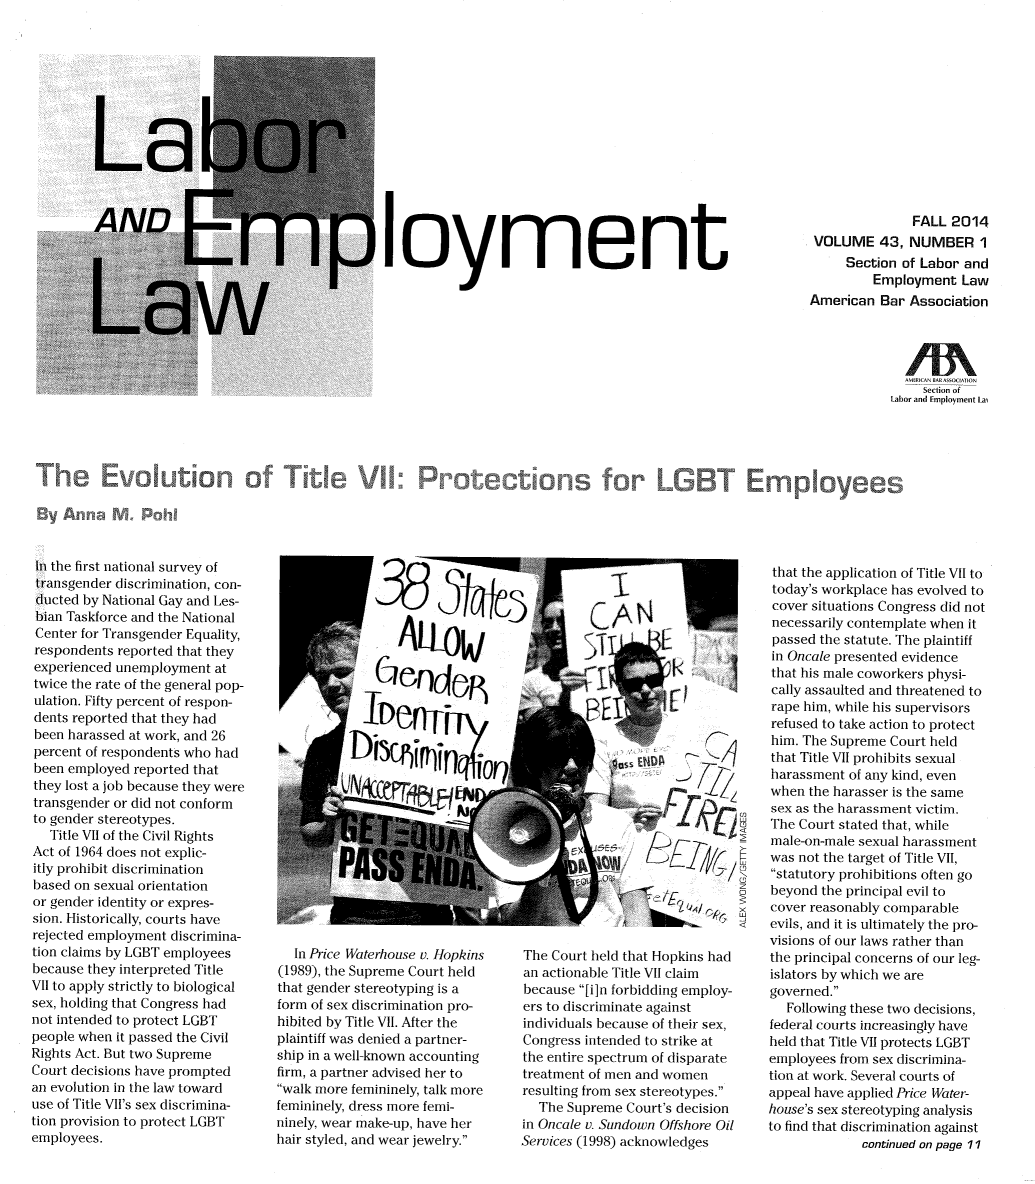 handle is hein.journals/laboemplo43 and id is 1 raw text is: )Ioyment               FALL 2014VOLUME 43, NUMBER 1     Section of Labor and         Employment LawAmerican Bar Association        A                                                                                                                     I BAR AScrION                                                                                                                              Section of                                                                                                                          Labor and Employment LaiTh         a                                  a alution AfTIt e rote ti s            rLIn the first national survey oftransgender discrimination, con-ducted by National Gay and Les-bian Taskforce and the NationalCenter for Transgender Equality,respondents reported that theyexperienced unemployment attwice the rate of the general pop-ulation. Fifty percent of respon-dents reported that they hadbeen harassed at work, and 26percent of respondents who hadbeen employed reported thatthey lost a job because they weretransgender or did not conformto gender stereotypes.   Title VII of the Civil RightsAct of 1964 does not explic-itly prohibit discriminationbased on sexual orientationor gender identity or expres-sion. Historically, courts haverejected employment discrimina-tion claims by LGBT employeesbecause they interpreted TitleVII to apply strictly to biologicalsex, holding that Congress hadnot intended to protect LGBTpeople when it passed the CivilRights Act. But two SupremeCourt decisions have promptedan evolution in the law towarduse of Title VII's sex discrimina-tion provision to protect LGBTemployees.   In Price Waterhouse v. Hopkins(1989), the Supreme Court heldthat gender stereotyping is aform of sex discrimination pro-hibited by Title VII. After theplaintiff was denied a partner-ship in a well-known accountingfirm, a partner advised her towalk more femininely, talk morefemininely, dress more femi-ninely, wear make-up, have herhair styled, and wear jewelry.The Court held that Hopkins hadan actionable Title VII claimbecause [i]n forbidding employ-ers to discriminate againstindividuals because of their sex,Congress intended to strike atthe entire spectrum of disparatetreatment of men and womenresulting from sex stereotypes.   The Supreme Court's decisionin Oncale v. Sundown Offshore OilServices (1998) acknowledgesthat the application of Title VII totoday's workplace has evolved tocover situations Congress did notnecessarily contemplate when itpassed the statute. The plaintiffin Oncale presented evidencethat his male coworkers physi-cally assaulted and threatened torape him, while his supervisorsrefused to take action to protecthim. The Supreme Court heldthat Title VII prohibits sexualharassment of any kind, evenwhen the harasser is the samesex as the harassment victim.The Court stated that, whilemale-on-male sexual harassmentwas not the target of Title VII,statutory prohibitions often gobeyond the principal evil tocover reasonably comparableevils, and it is ultimately the pro-visions of our laws rather thanthe principal concerns of our leg-islators by which we aregoverned.   Following these two decisions,federal courts increasingly haveheld that Title VII protects LGBTemployees from sex discrimina-tion at work. Several courts ofappeal have applied Price Water-house's sex stereotyping analysisto find that discrimination against             continued on page 11